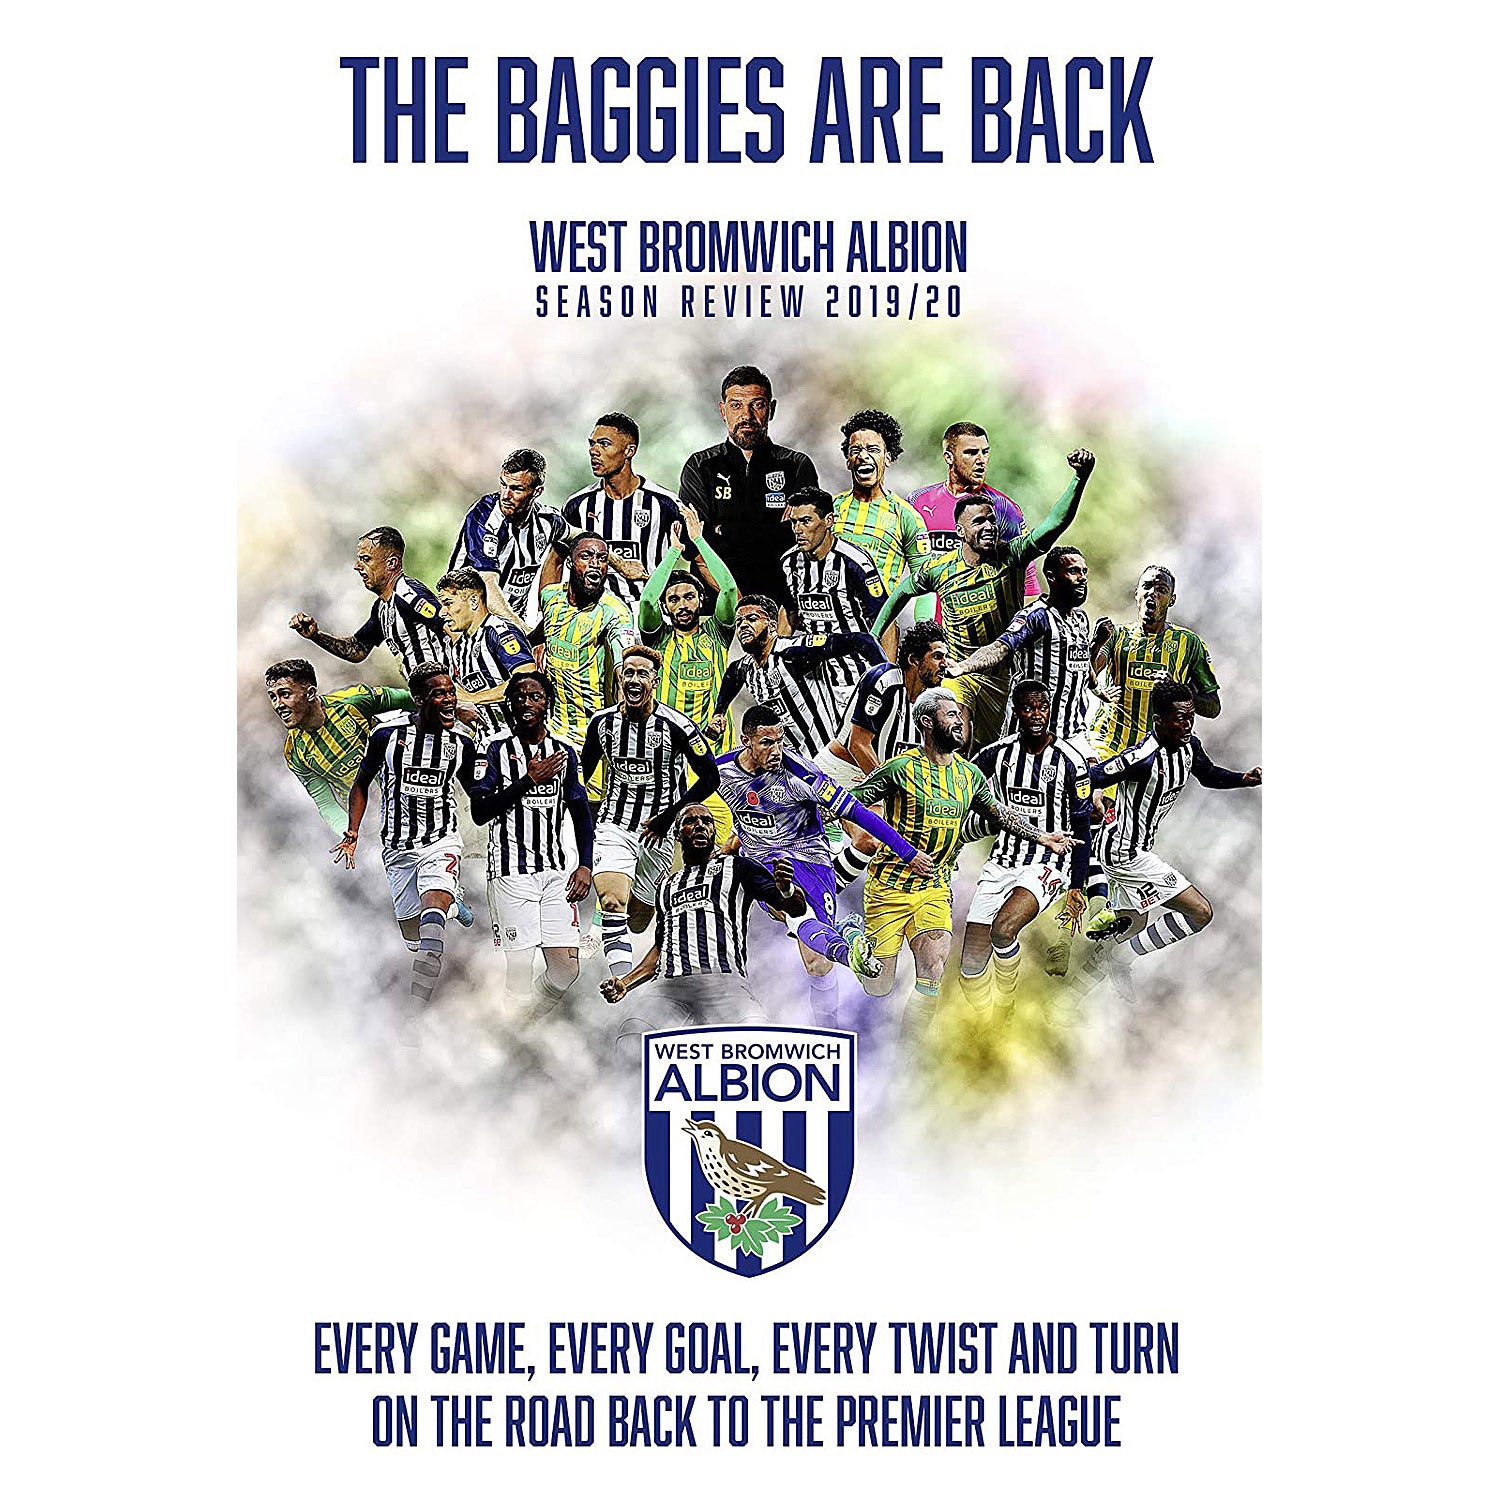 West Bromwich Albion Season Review 2019/20 – The Baggies Are Back